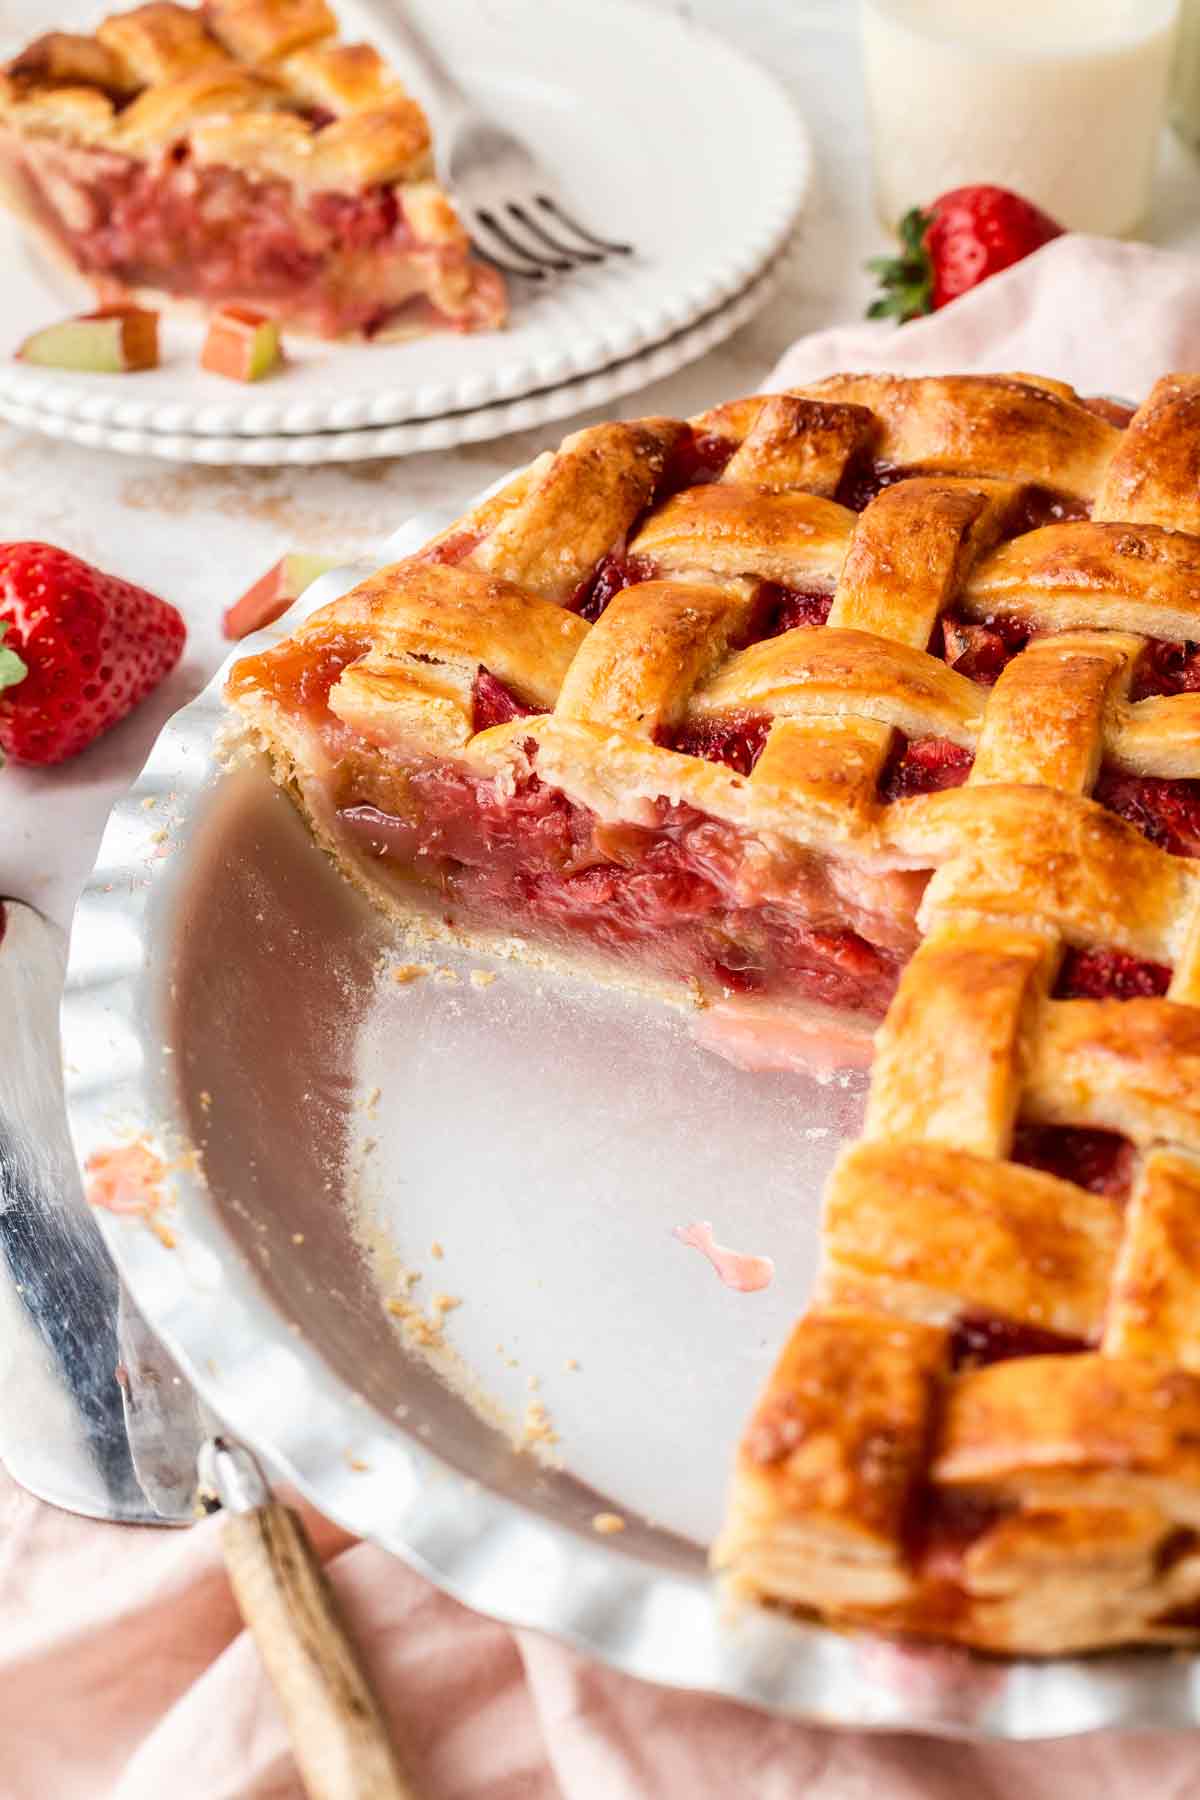 Strawberry Rhubarb Pie with store-bought crust